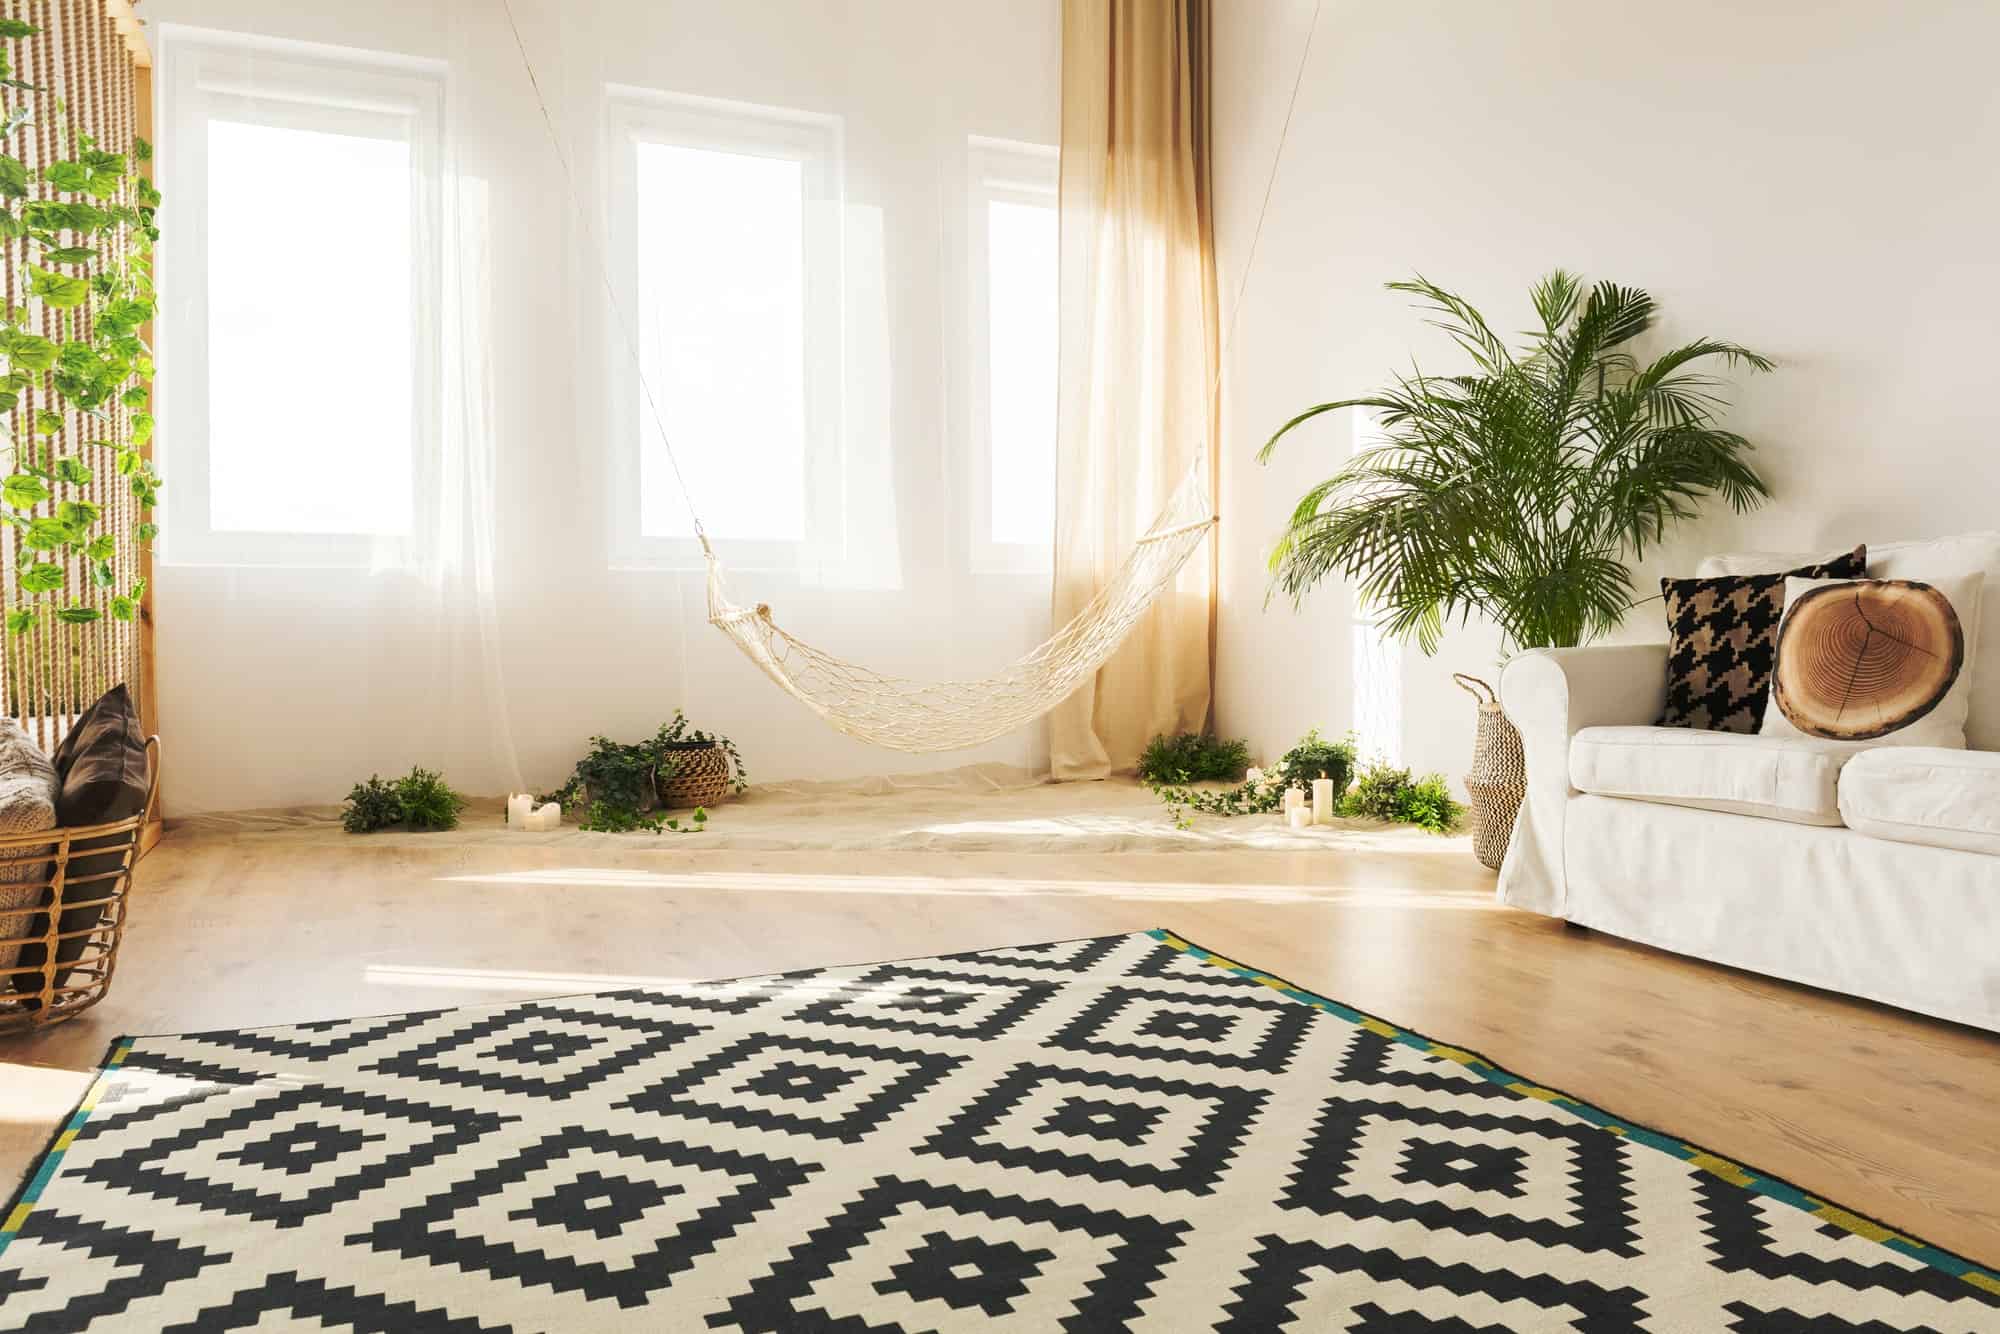 Eco room with pattern carpet